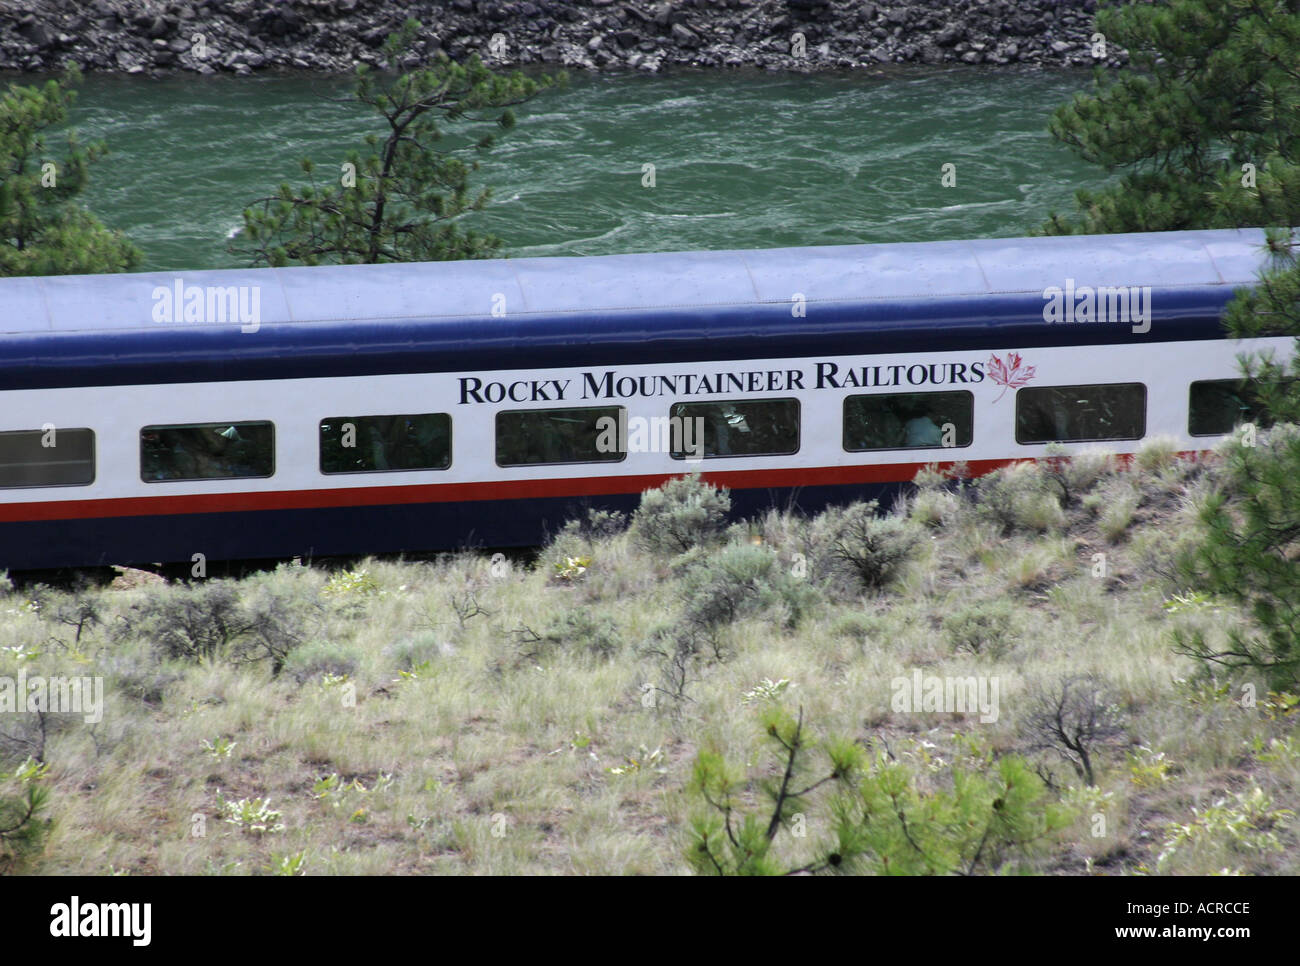 Rocky Mountaineer Railtours Train travelling by the Thompson River near Spencers Bridge in British Columbia Canada Stock Photo